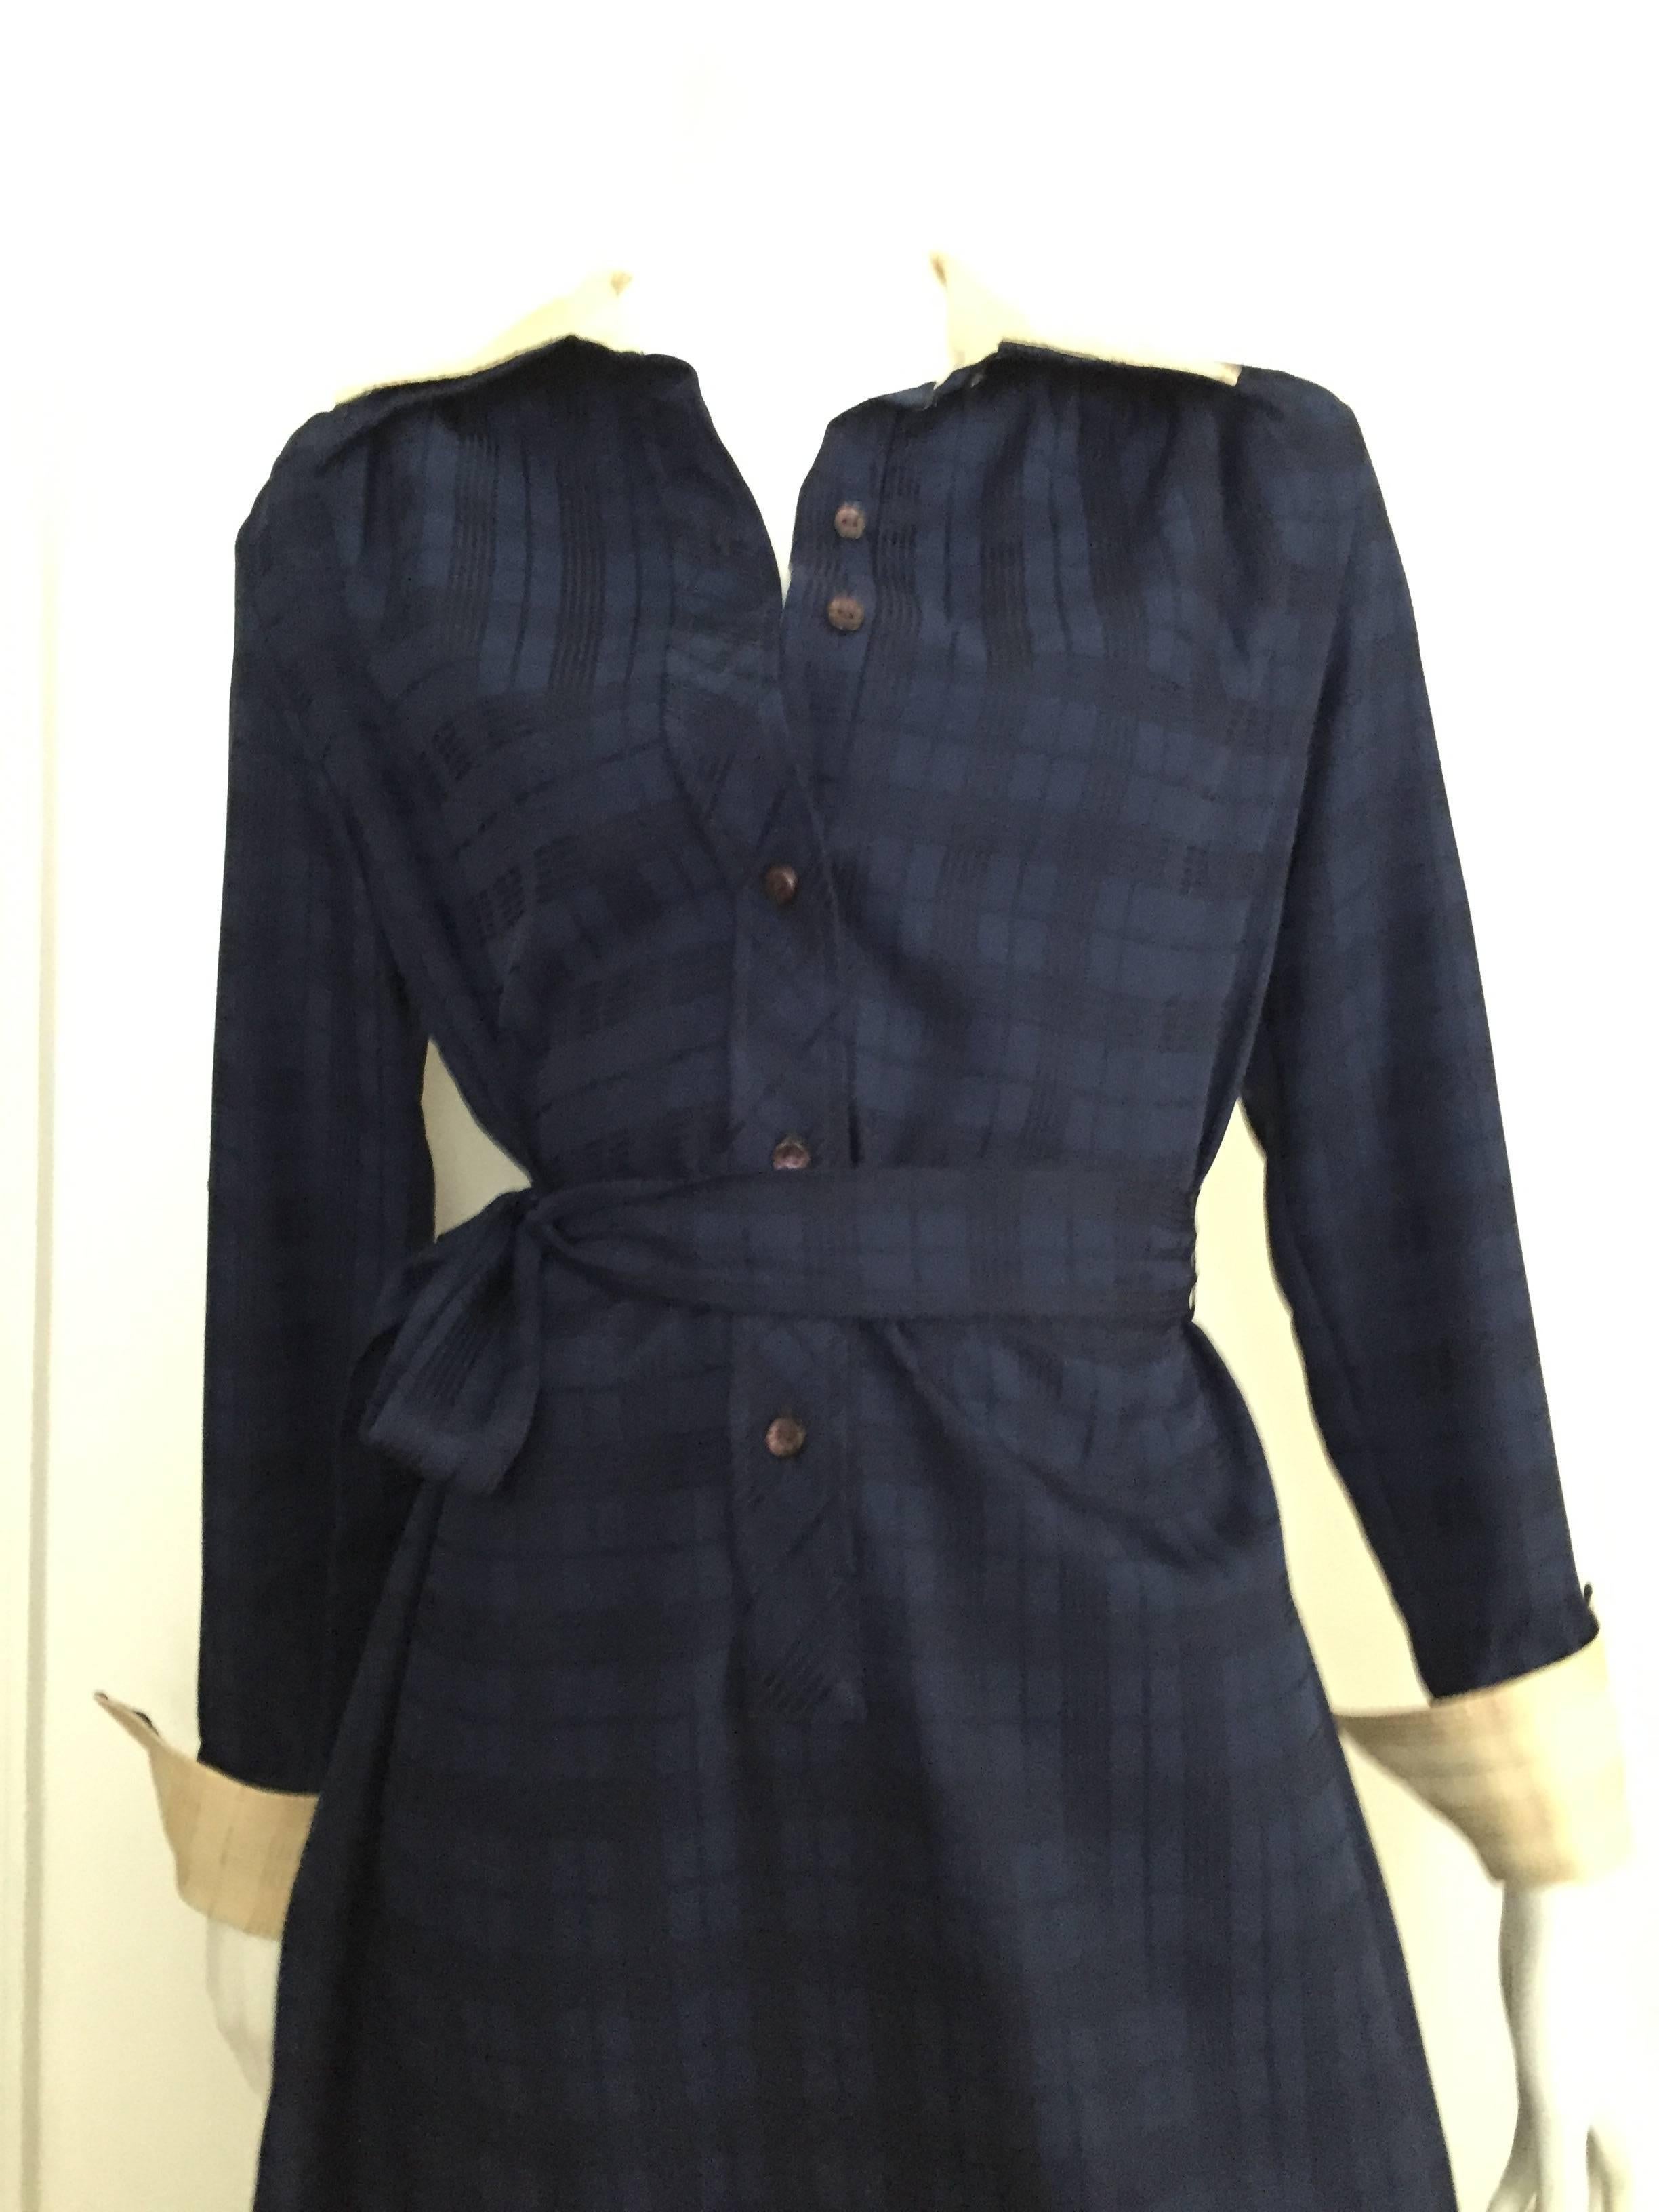 Lanvin 1970s navy plaid shirt dress with tie is a vintage size 16 but fits like a modern USA size 10 / 12.  Please see & use the measurements below so you can properly measure your bust, waist & hips to make certain this will fit you